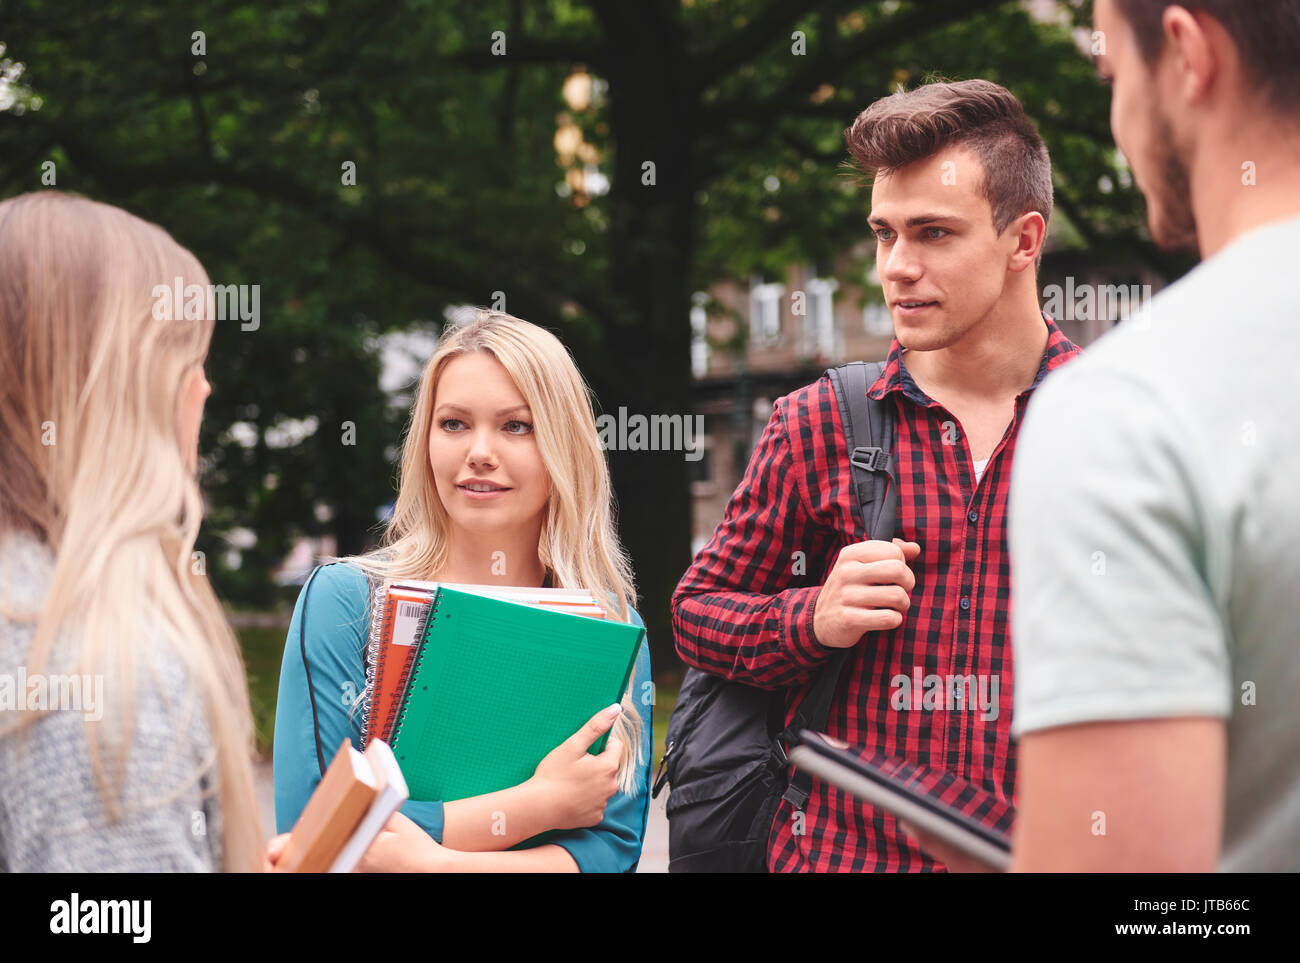 Young people talking and socializing outside Stock Photo